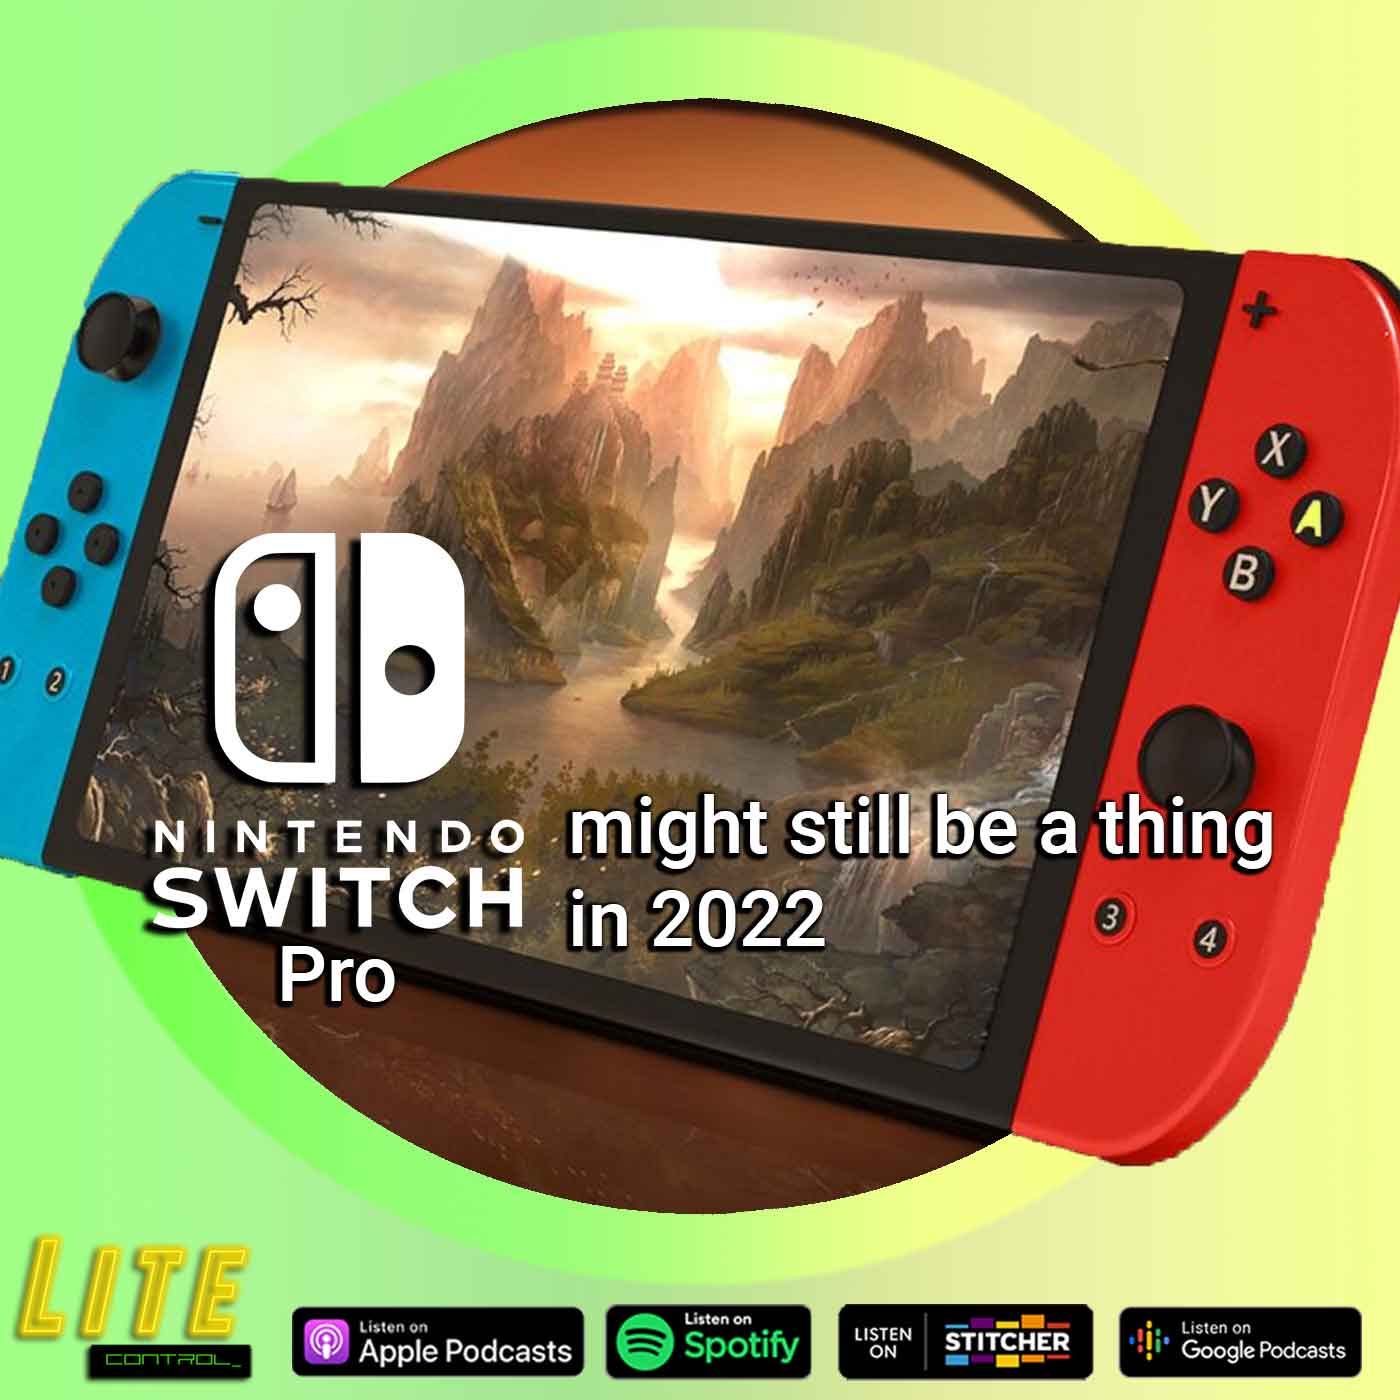 Lite Control 143 - Despite the OLED Model, The Switch Pro May Still Push Through in 2022